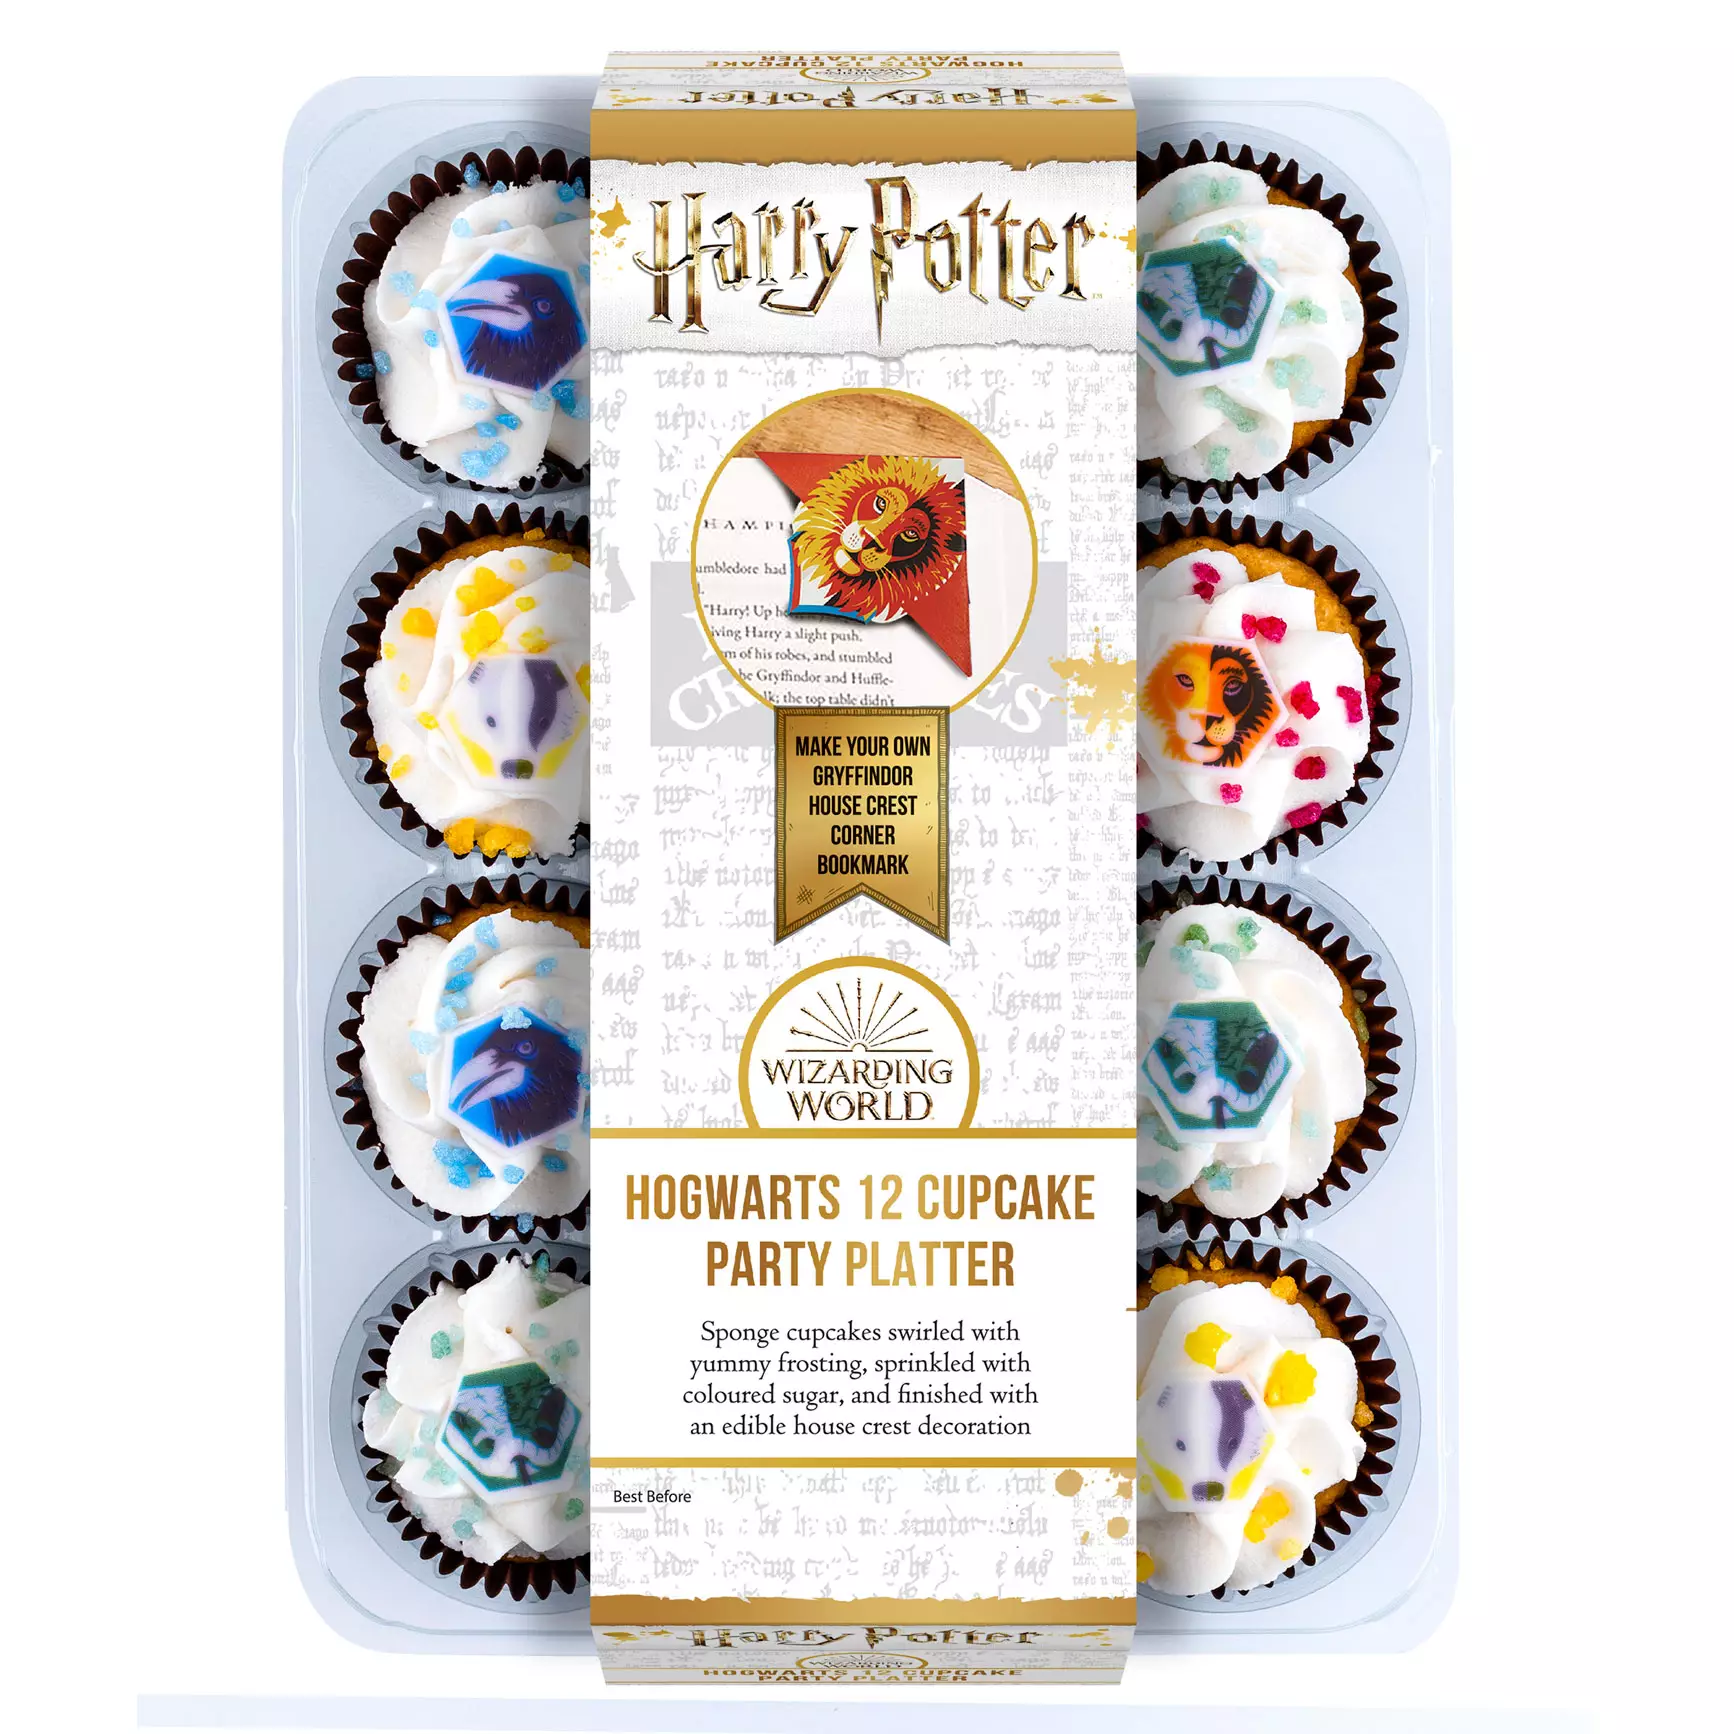 12 pack of Harry Potter Cupcakes with the 4 House Crests- RRP £7